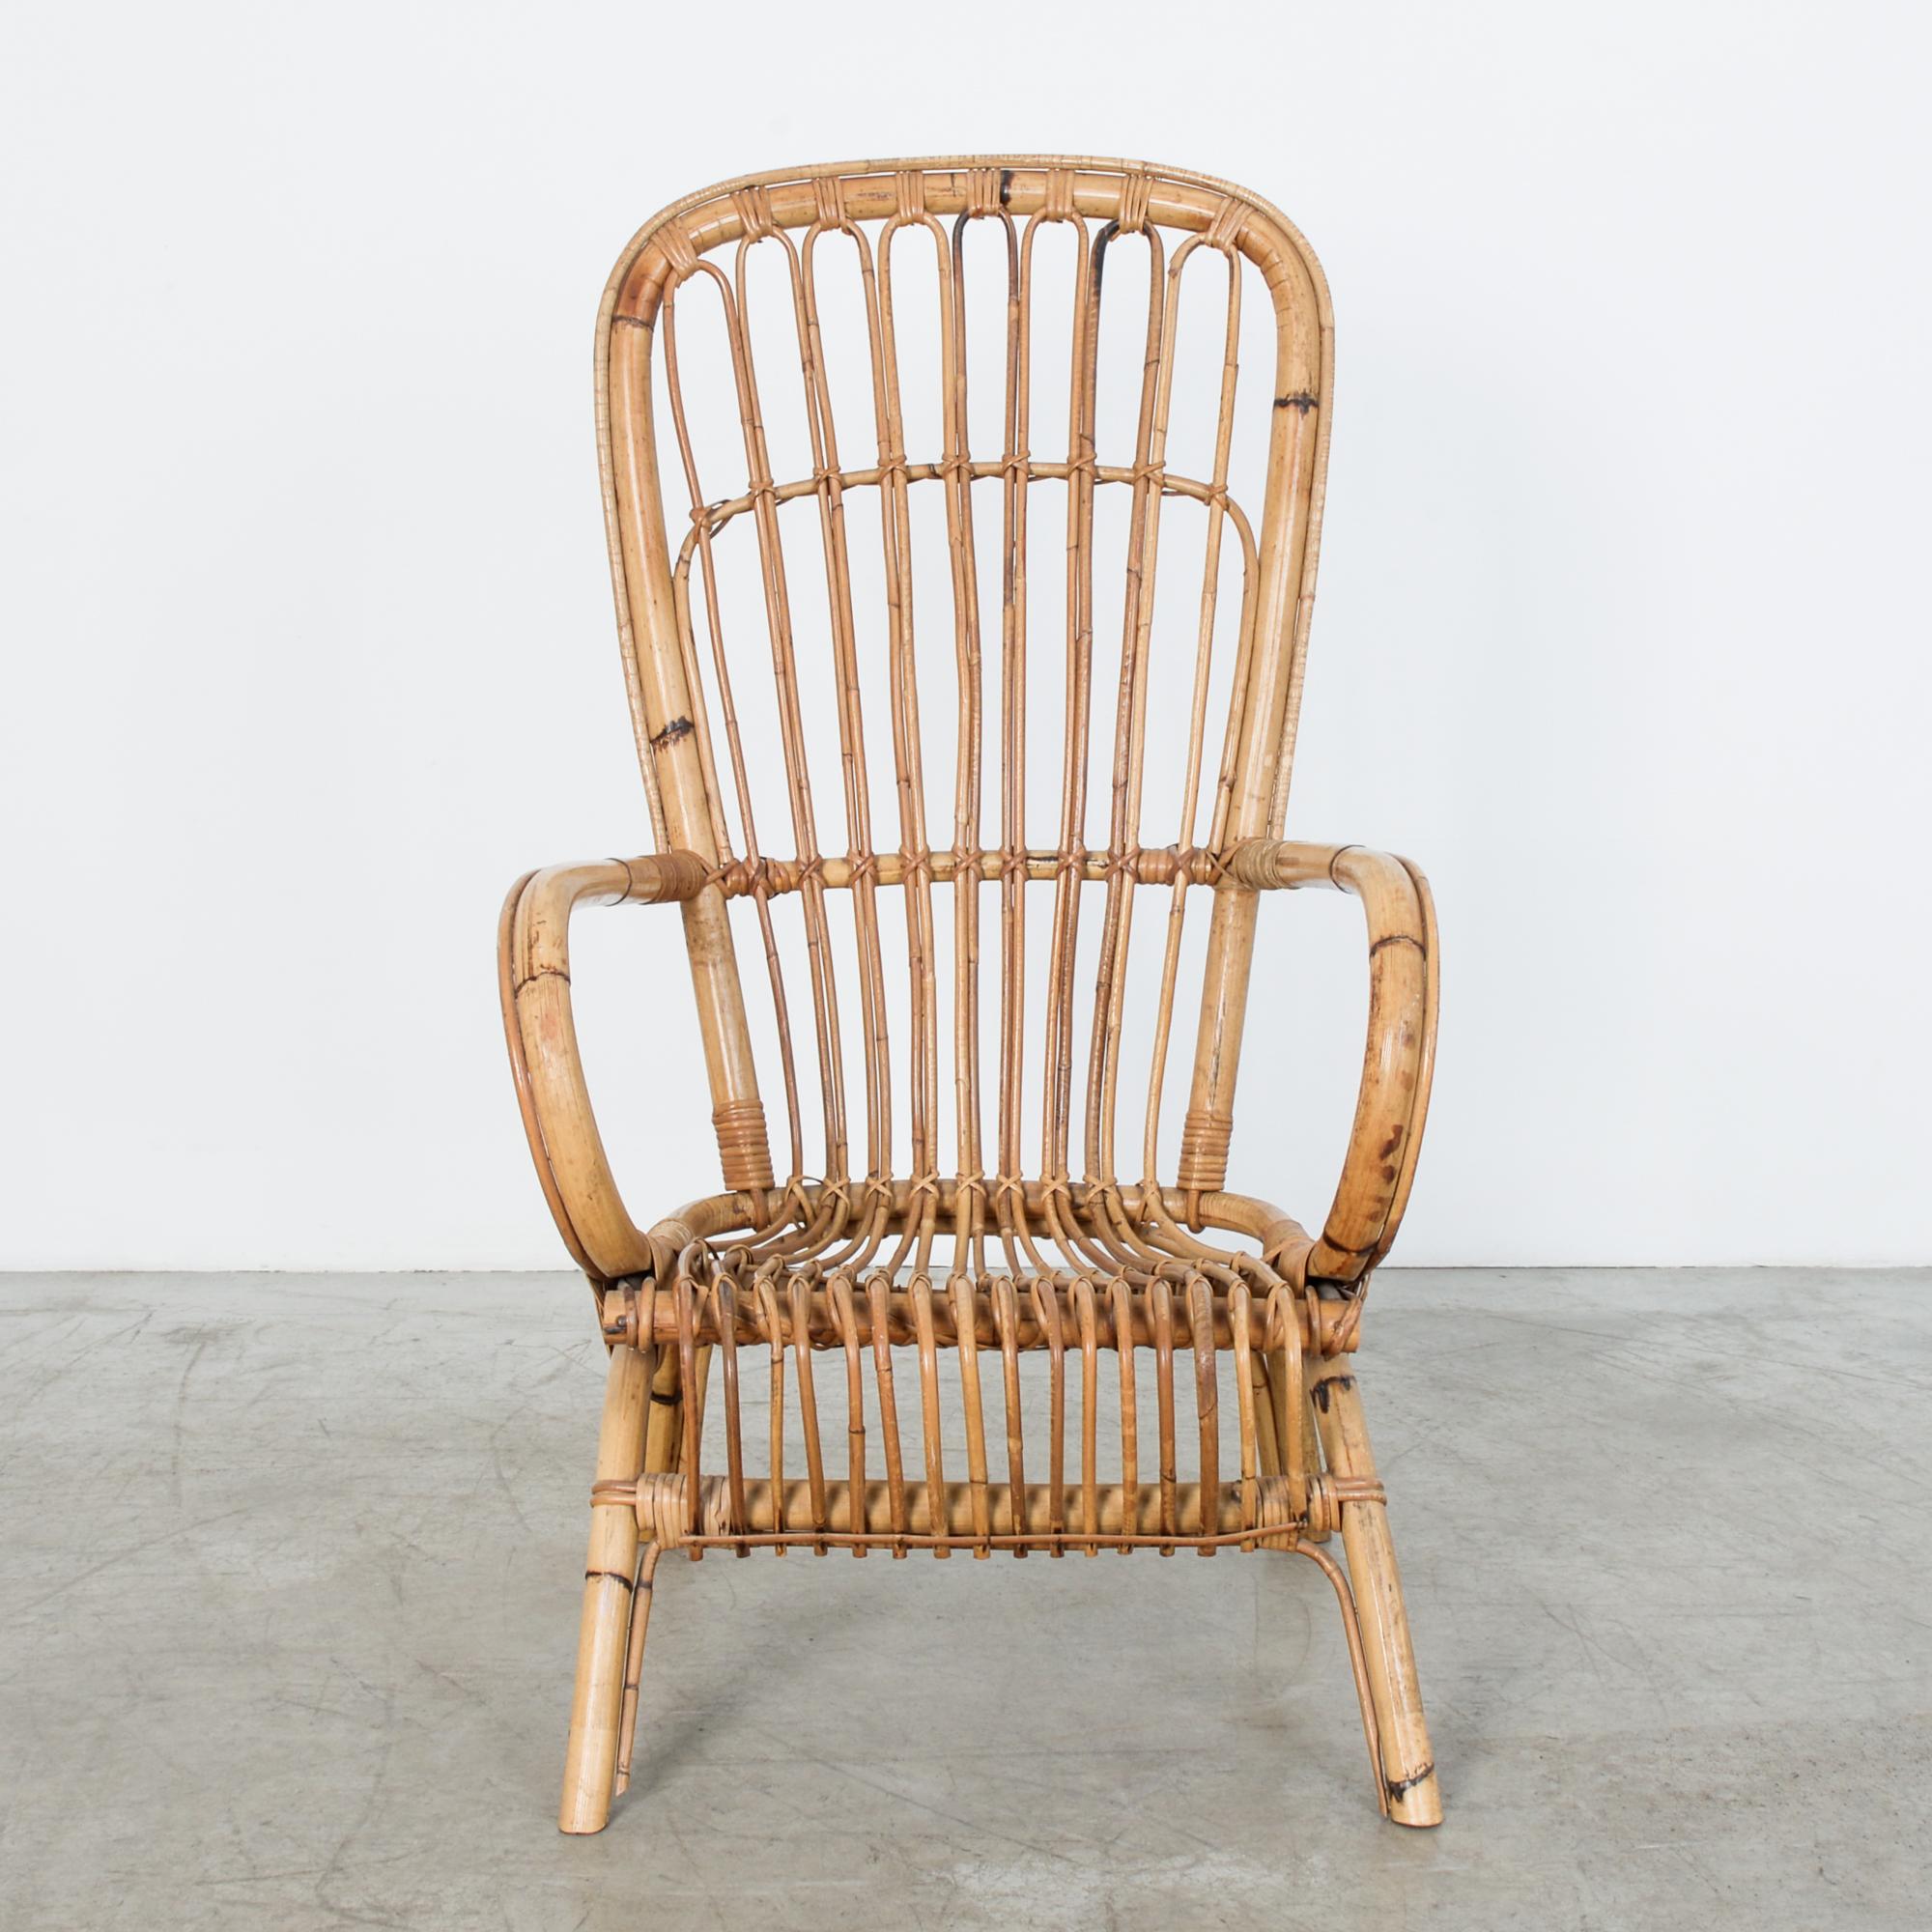 The chair from your childhood. An idyllic past, warm and comfortably inviting a fresh future. Bamboo and rattan chair from 1960s, France. On a frame a stylish curved seat reclines comfortably. This unpretentious bamboo chair gives us a wanted moment